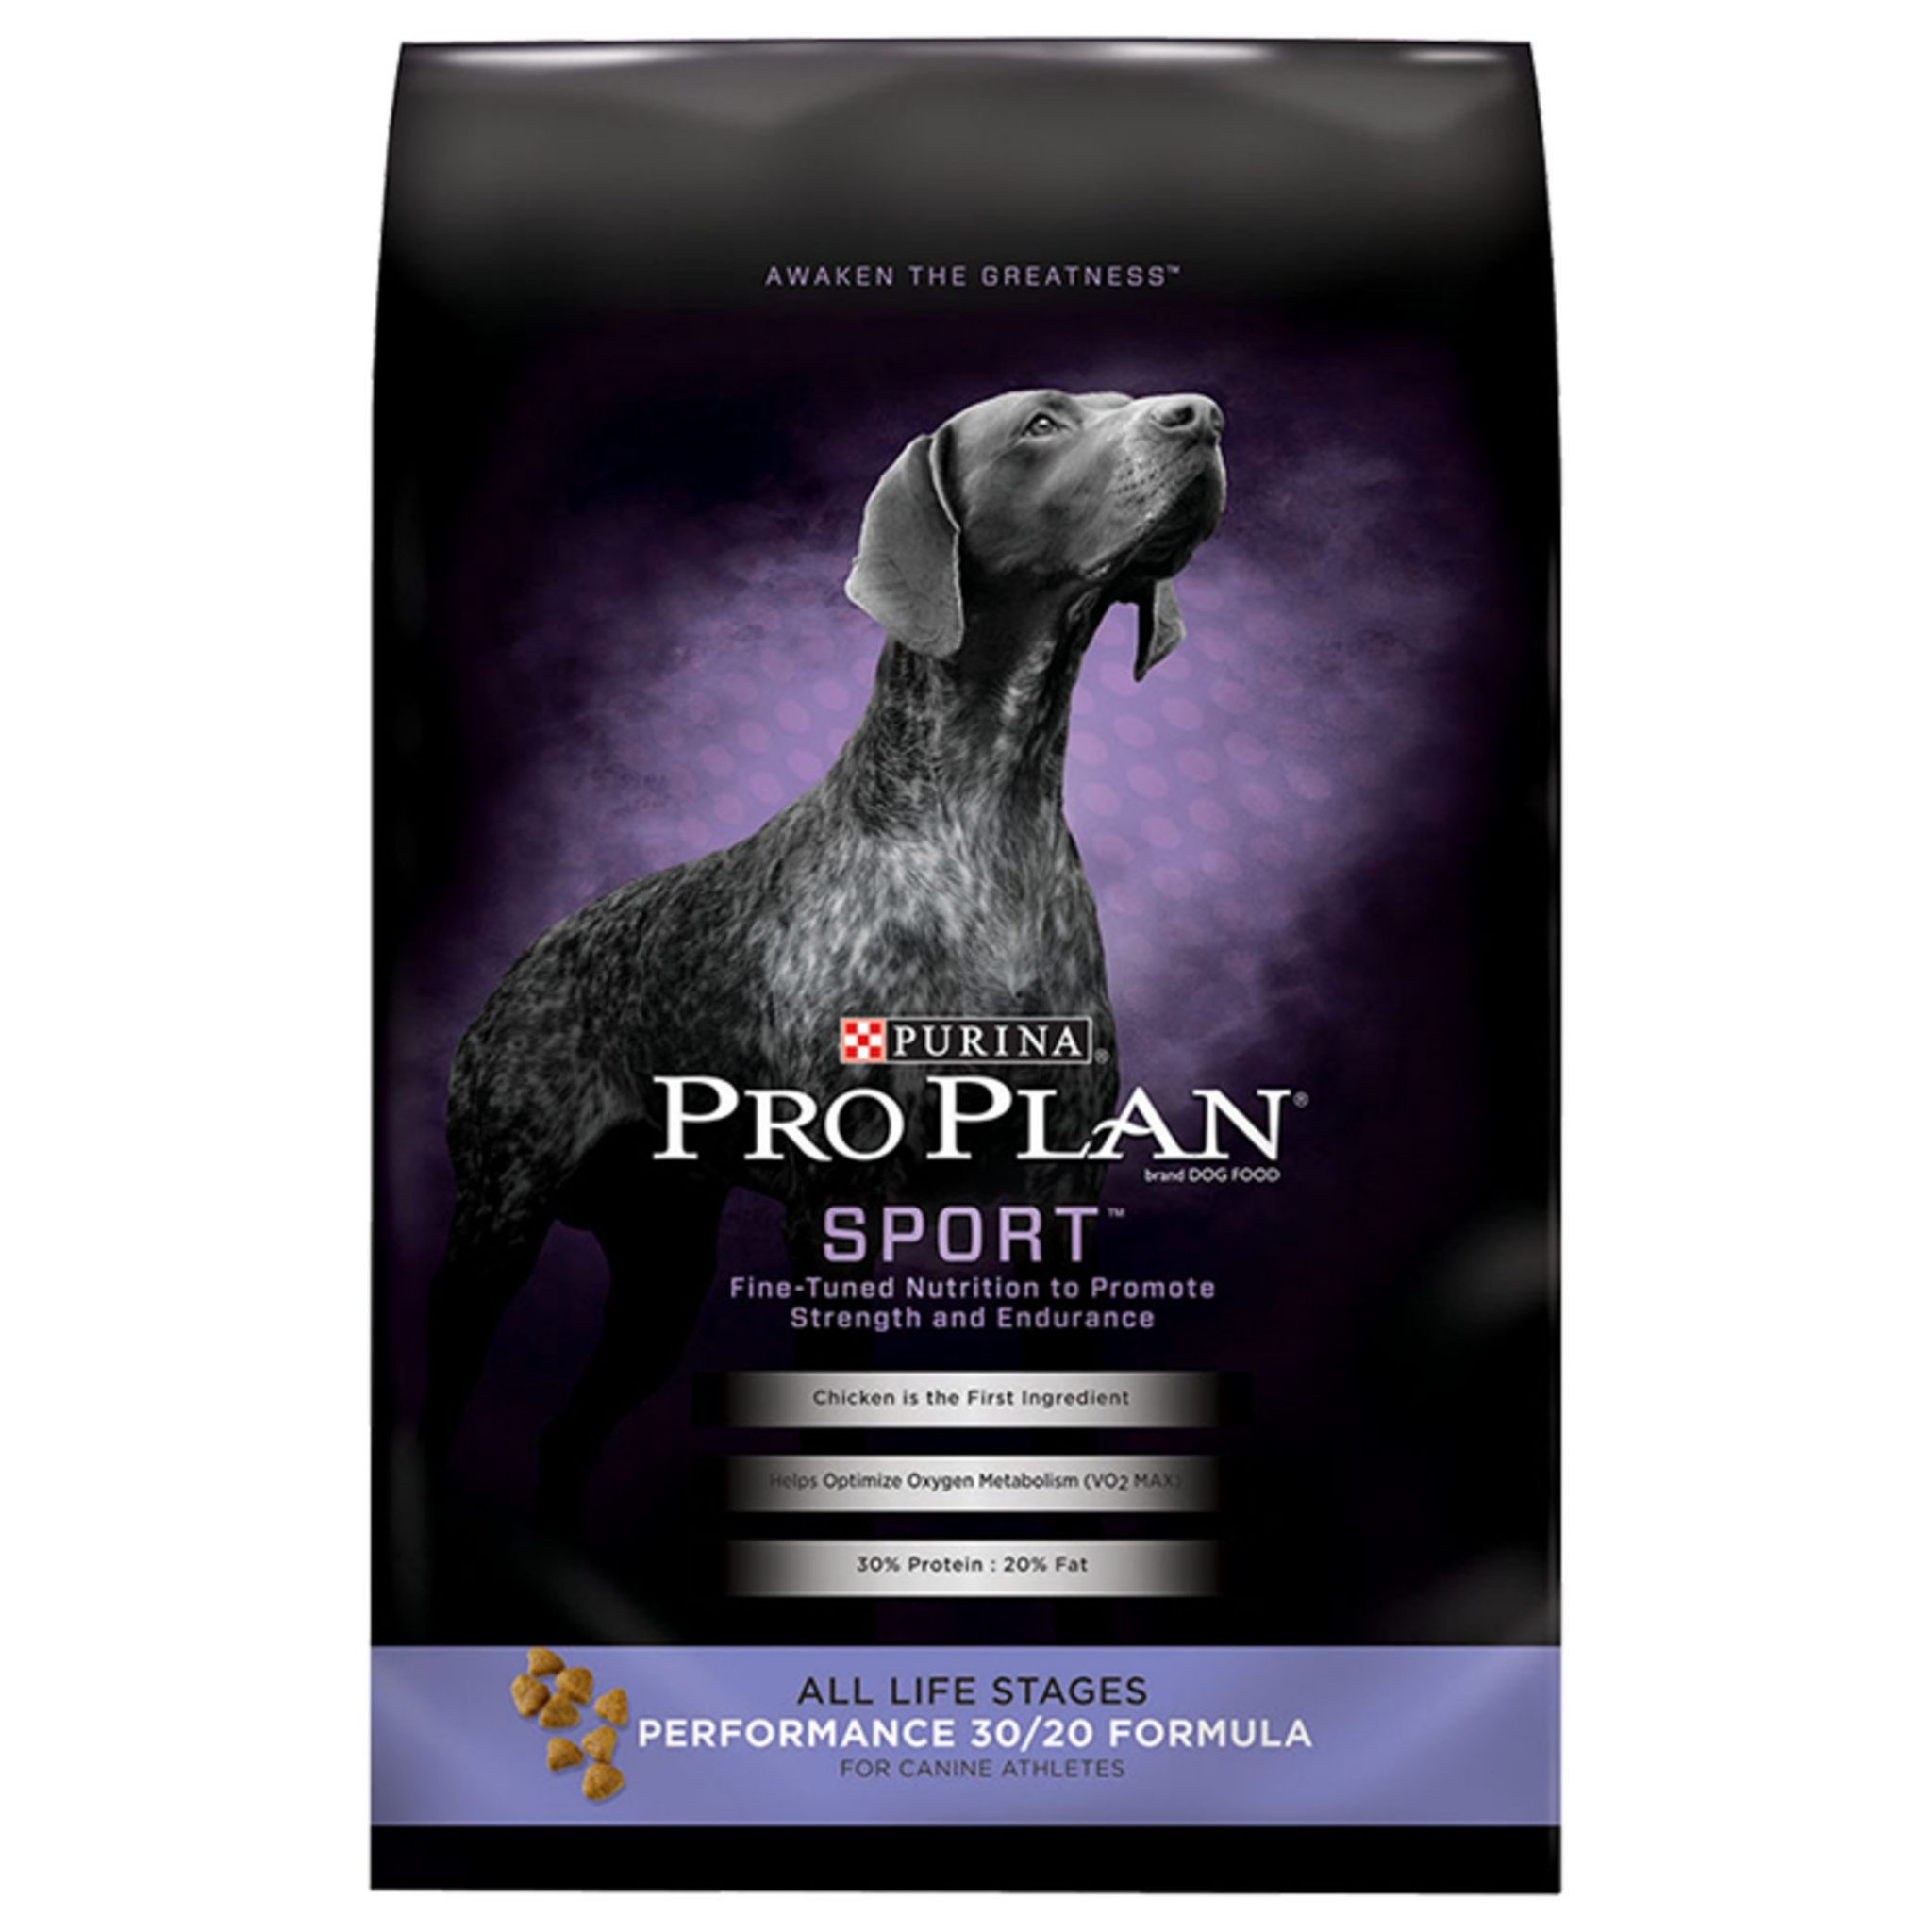 Purina Pro Plan High Protein Sport Performance 30/20 Formula Dry Dog Food, 6 lbs. Pet Food Ratings